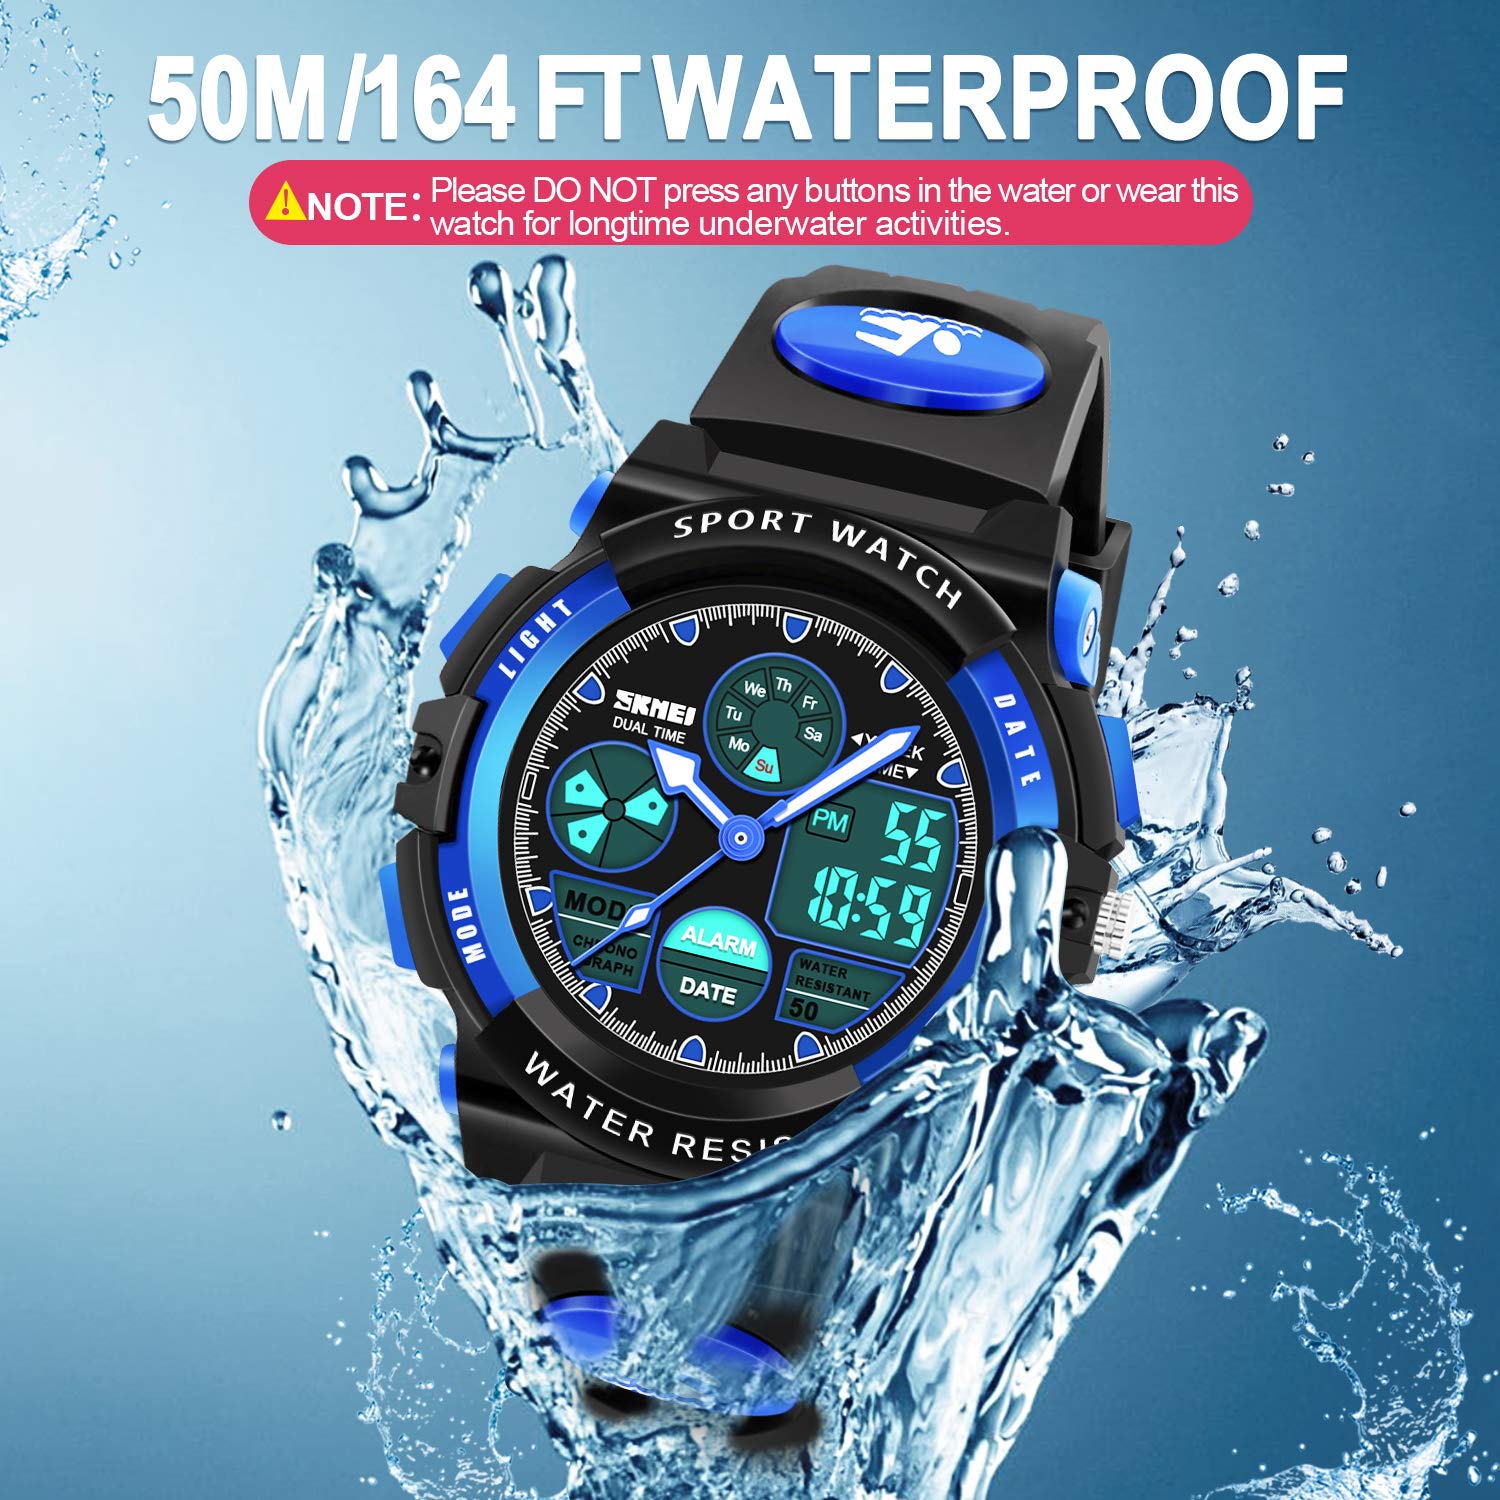 Dodosky Boy Toys Age 5-12, LED 50M Waterproof Digital Sport Watches for Kids Birthday Presents Gifts for 5-13 Year Old Boys - Blue